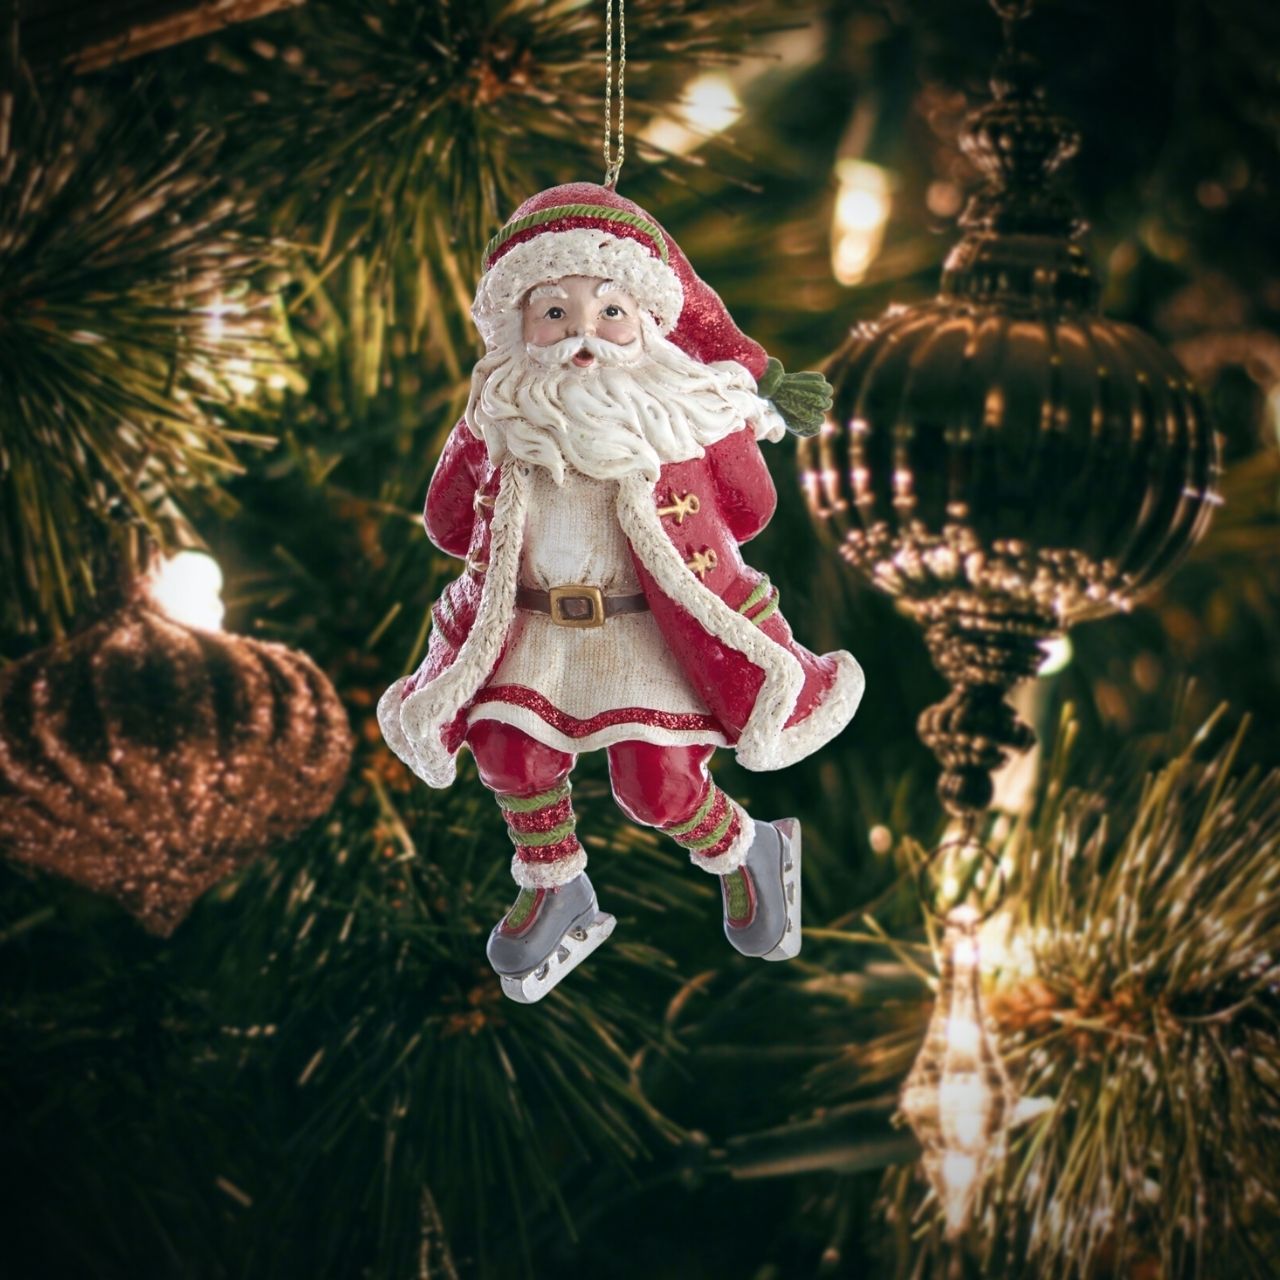 Kurt S Adler Skating Santa Christmas Hanging Ornament - Arm Back  Skating Santa ornament from Kurt Adler is a charming addition to any holiday décor or Christmas tree. Santa wearing a red, white and green Santa outfit with a glittered hat and ice skates.